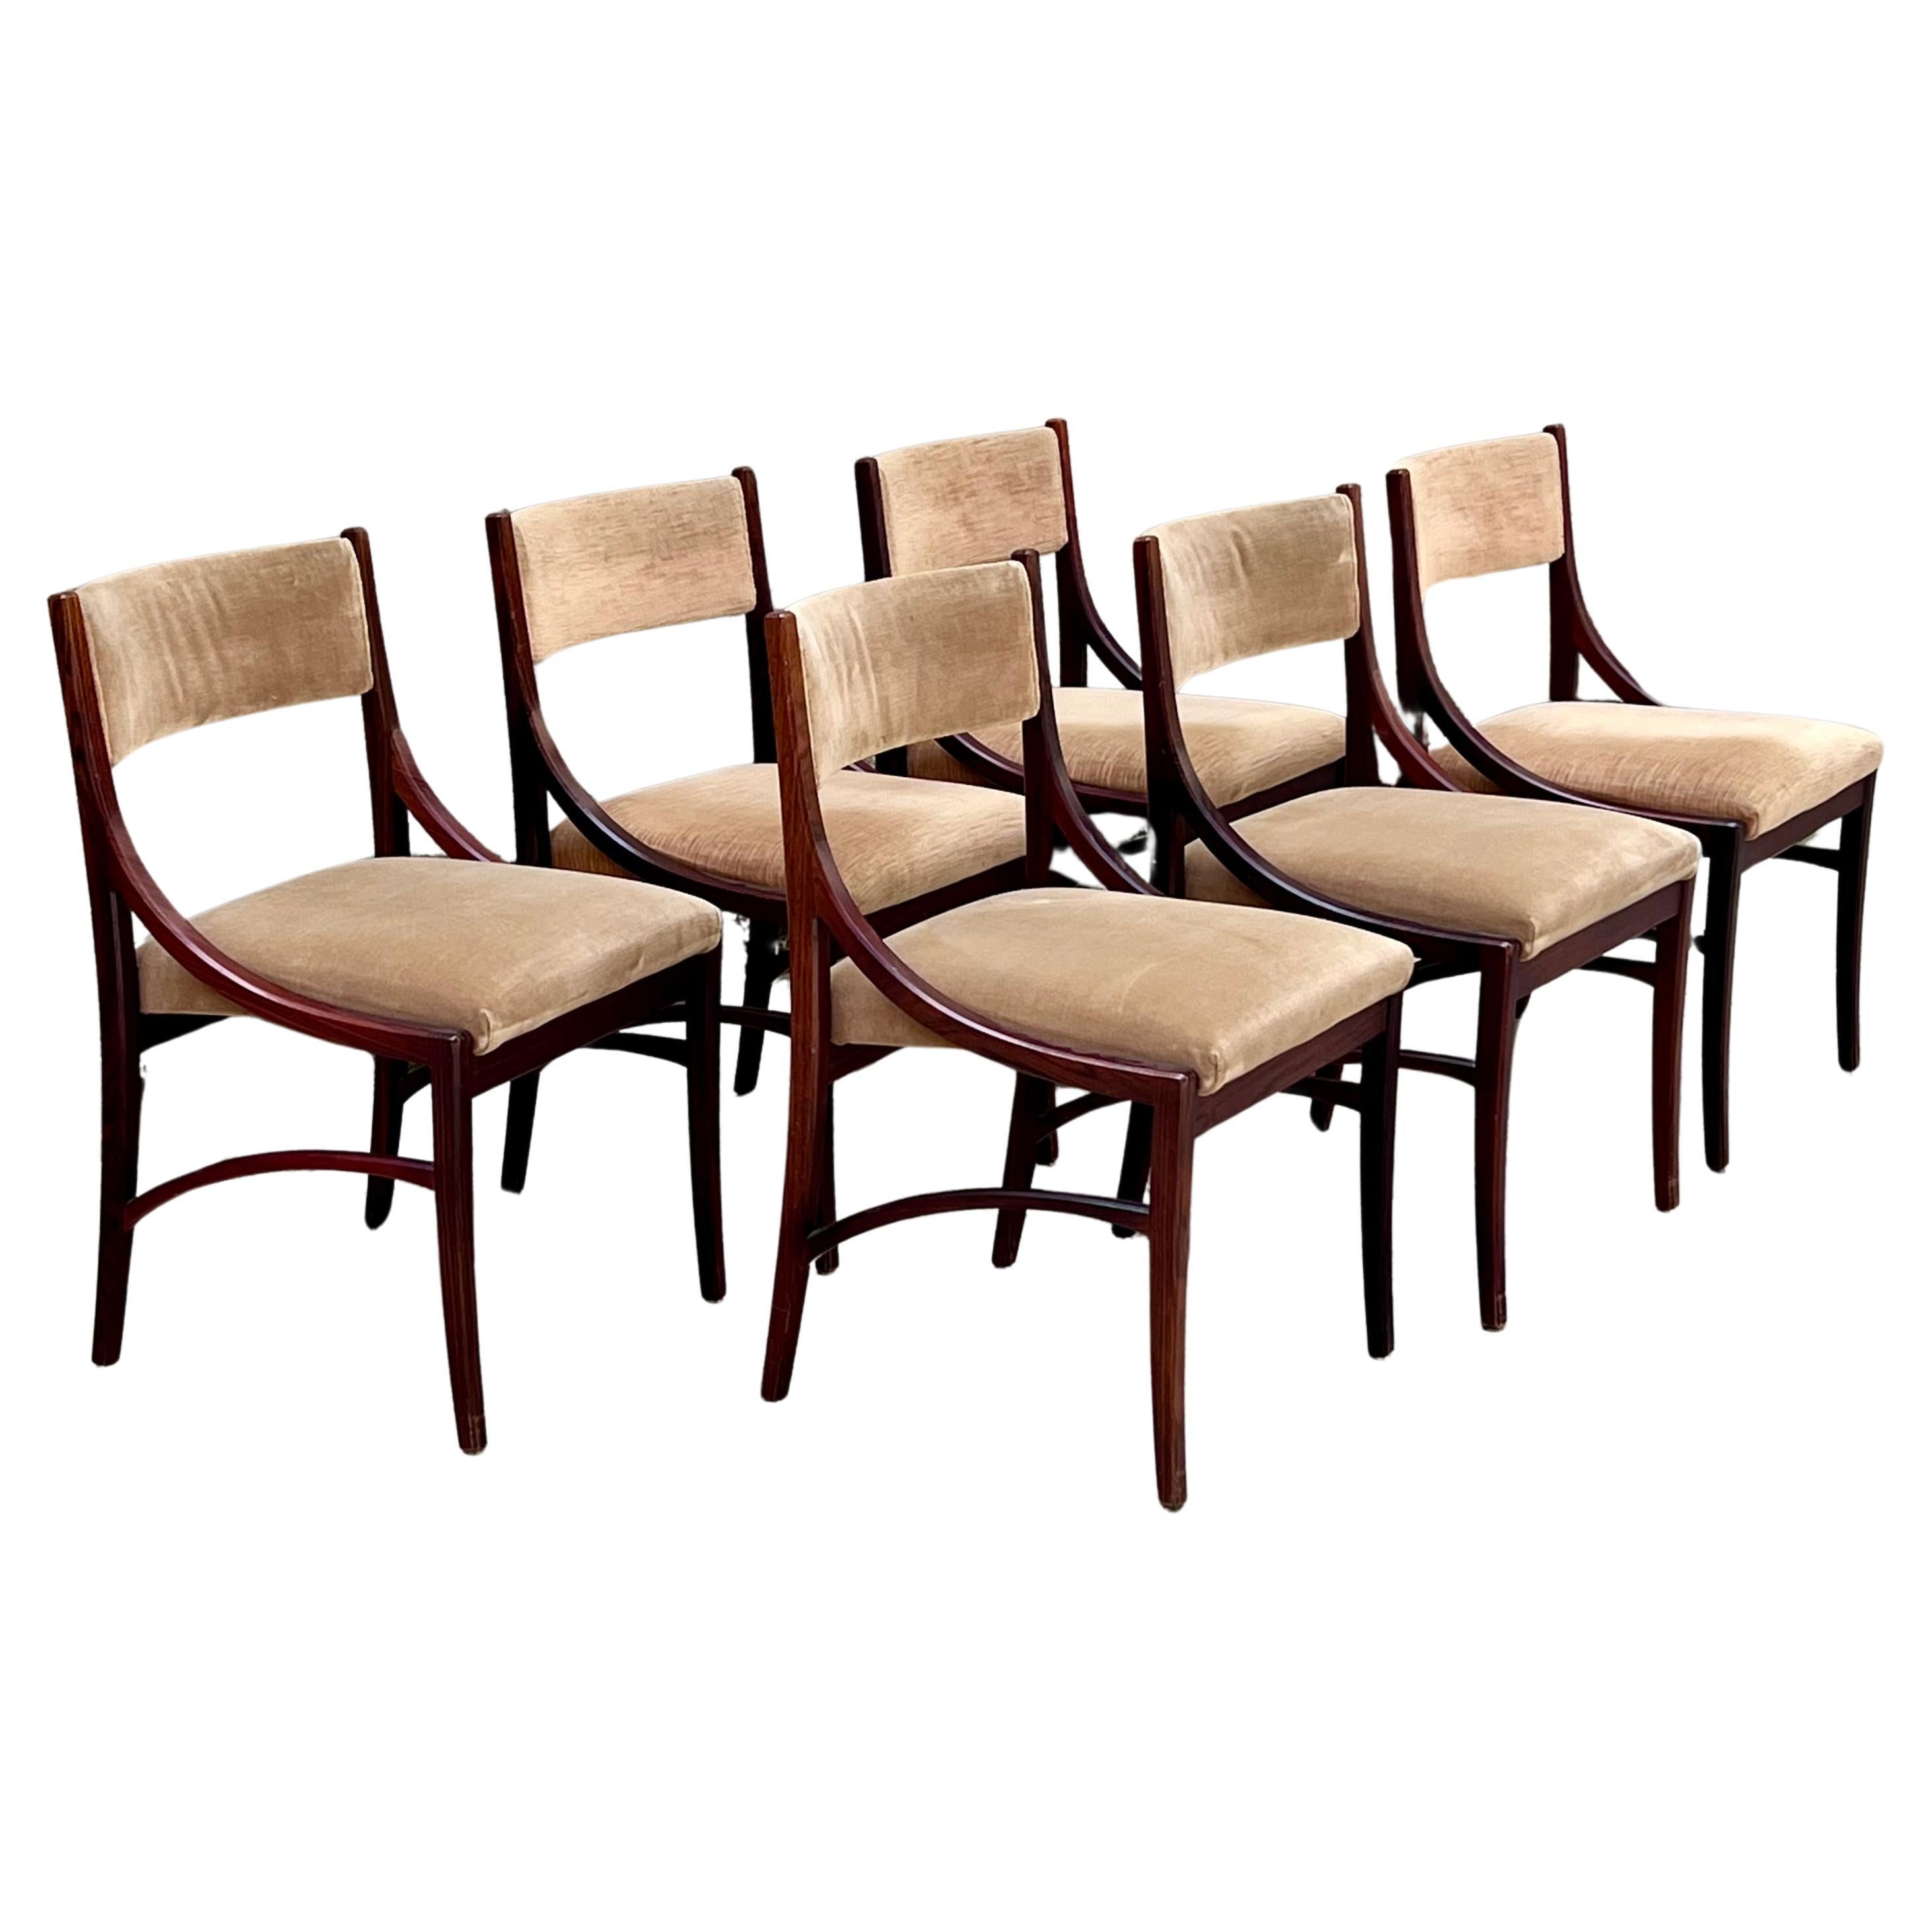 Set of Six Mahogany Chairs Mod.110 by Ico Parisi for Cassina - Italy - 1960s For Sale